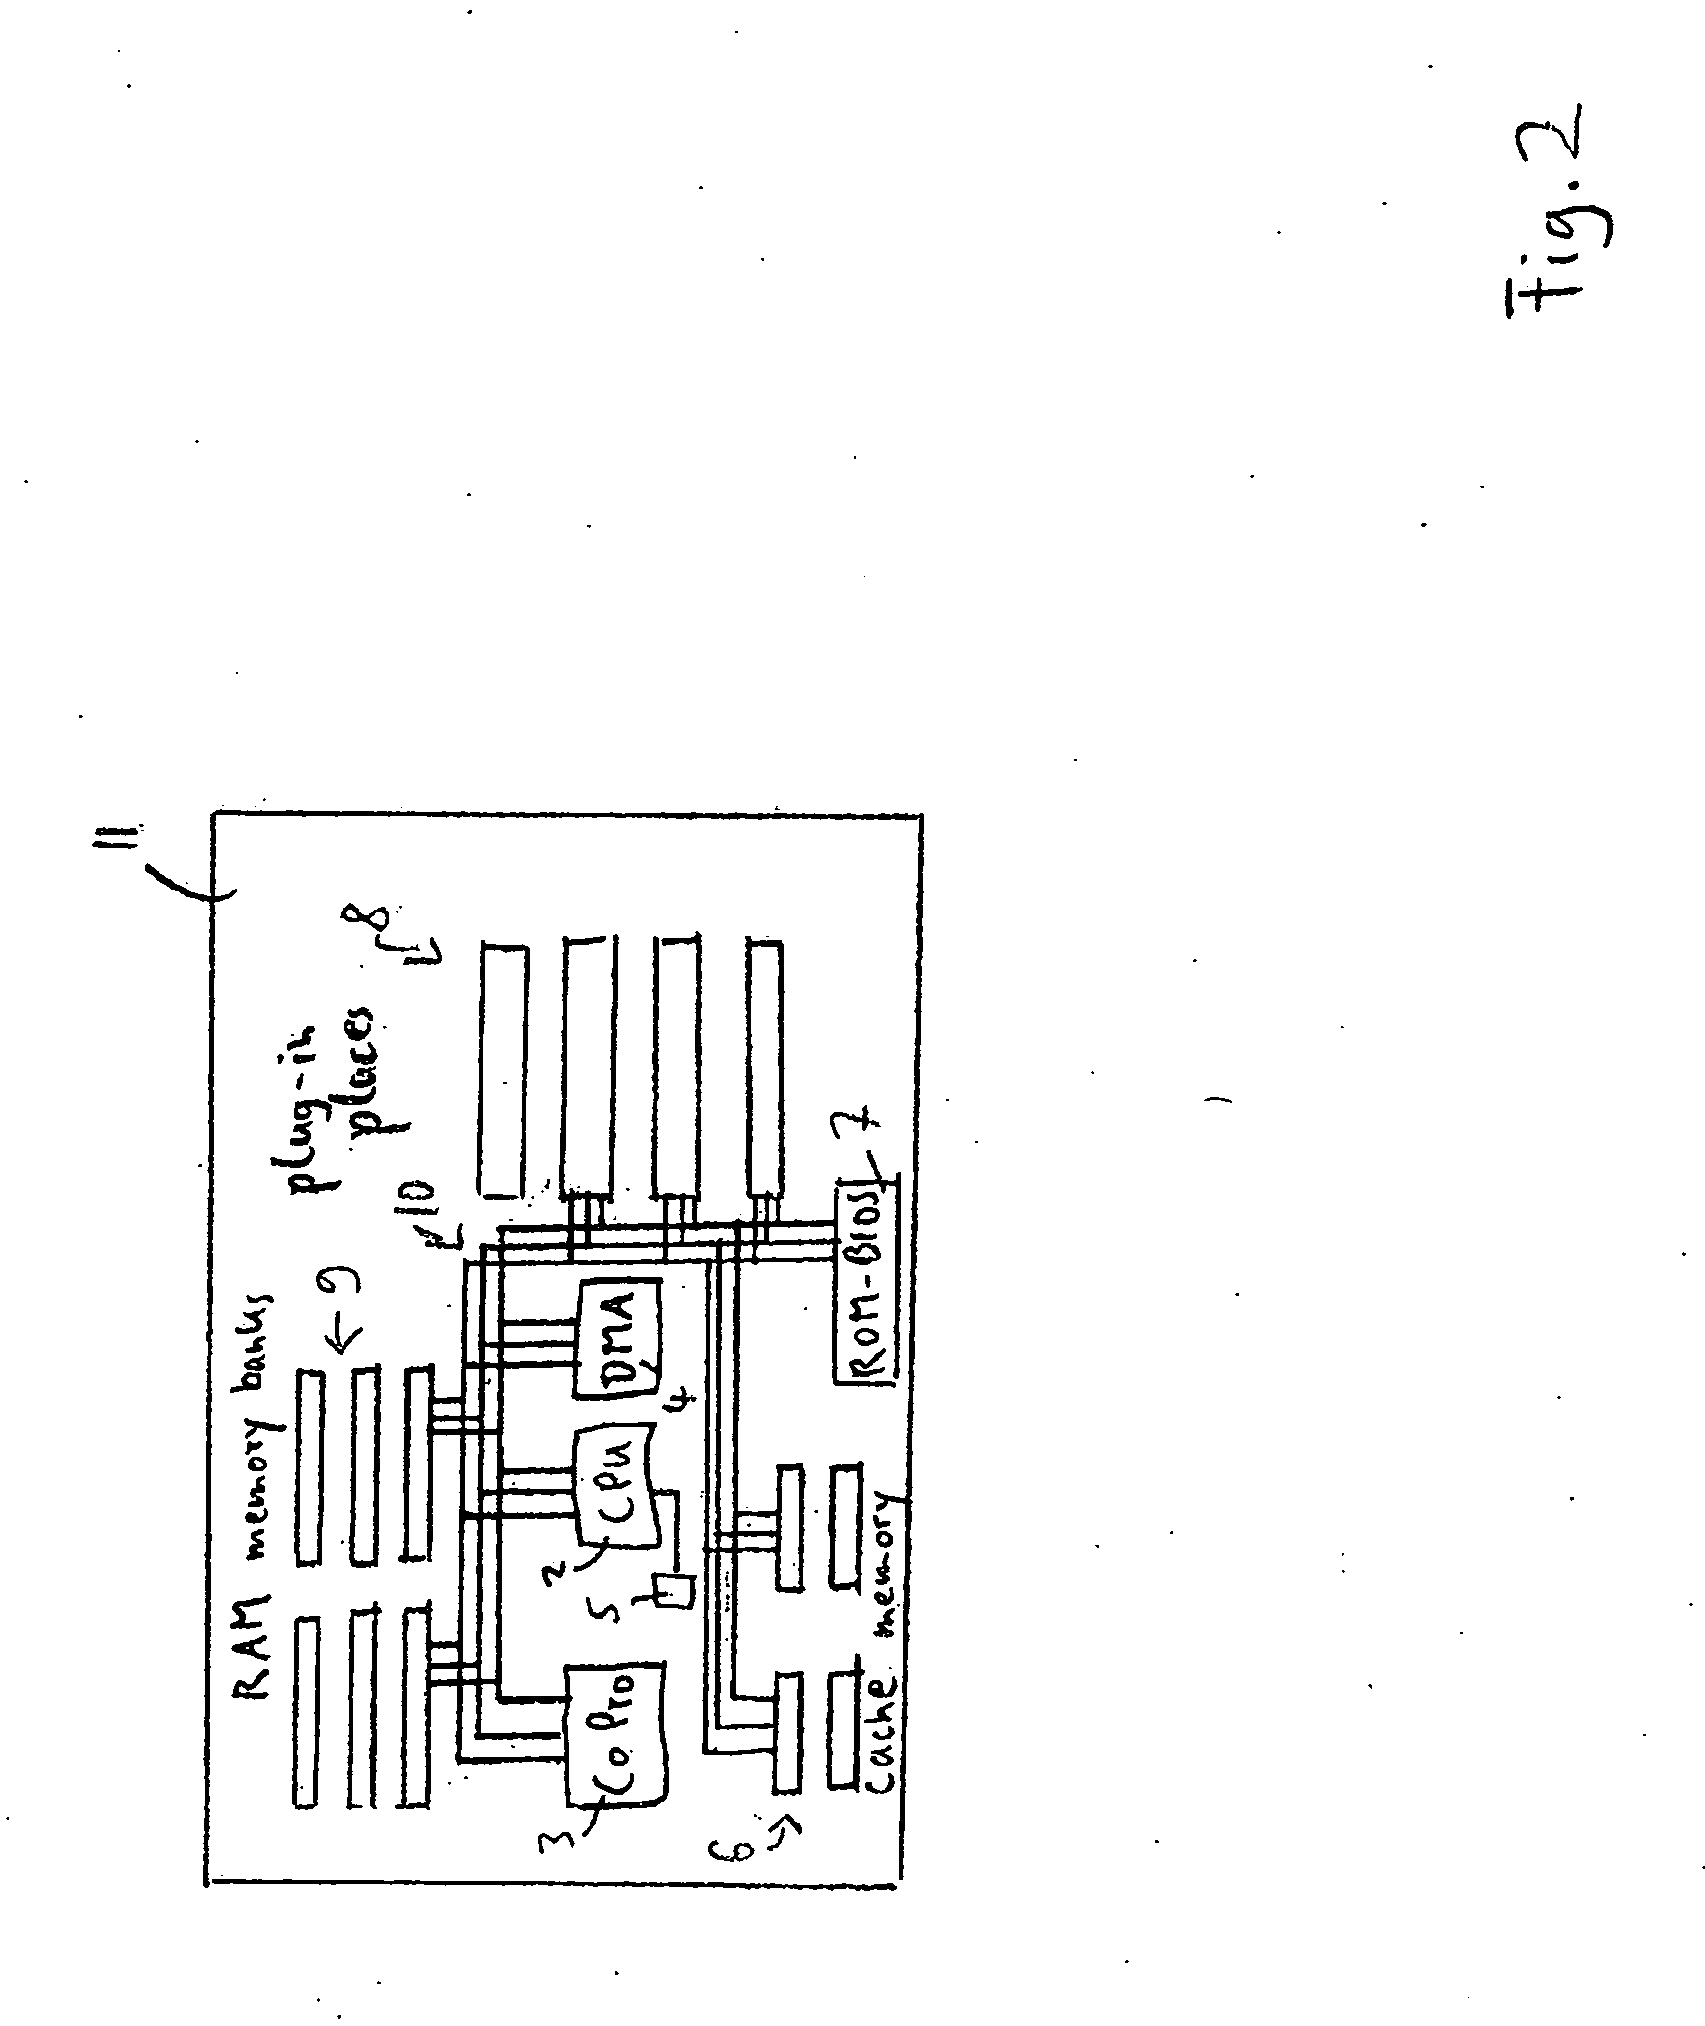 Method and apparatus for transforming code of a non-proprietary program language into proprietary program language